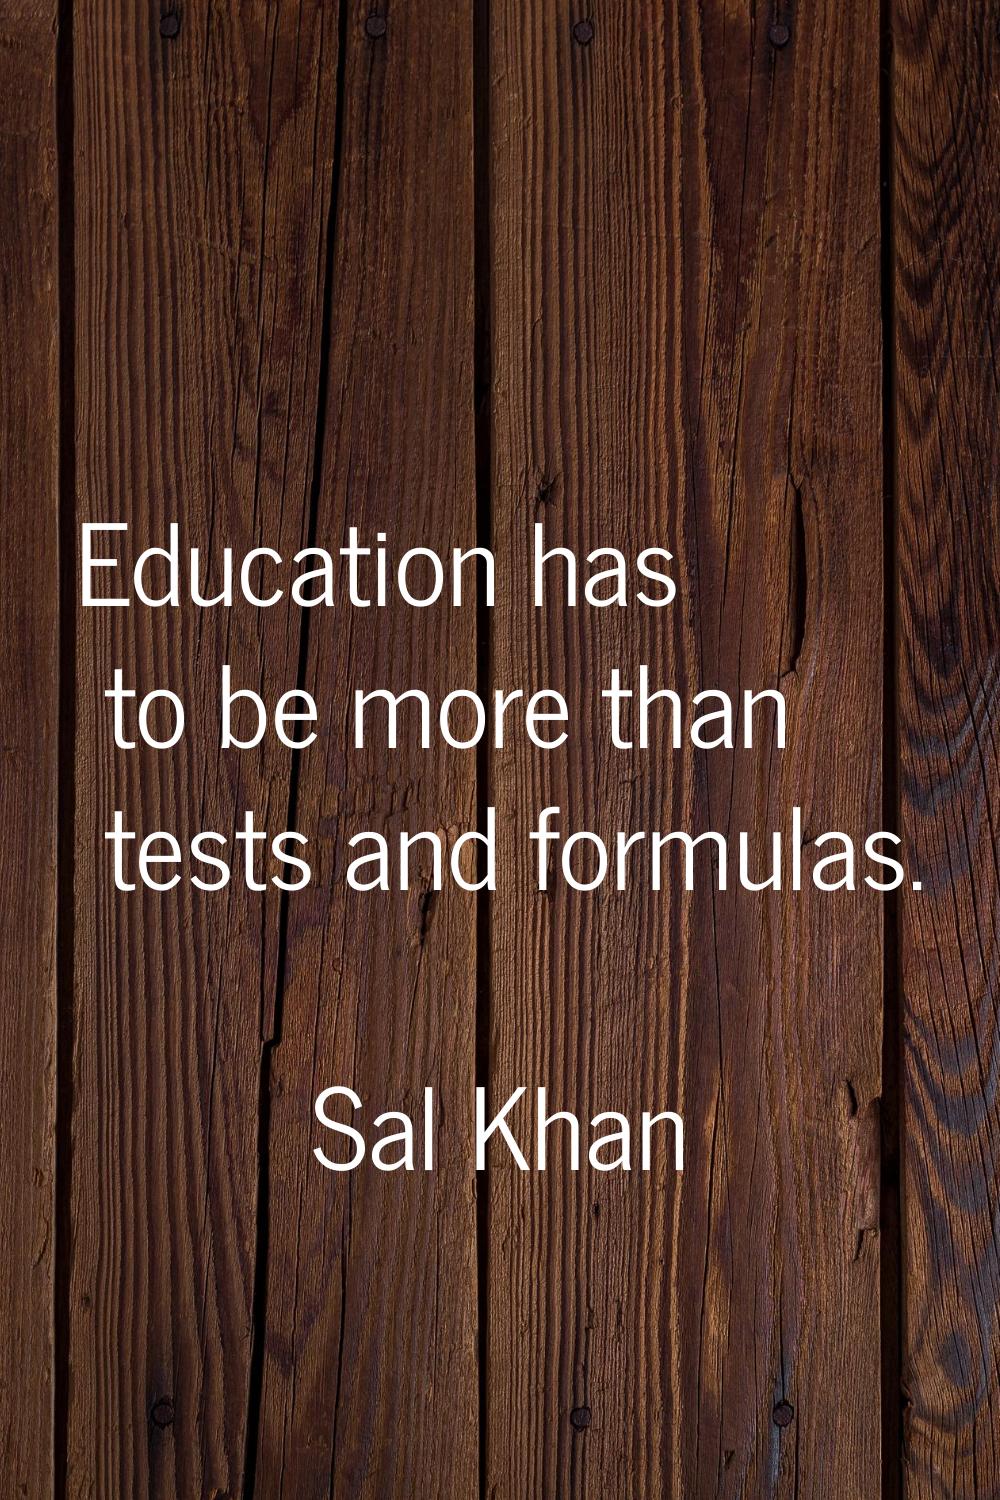 Education has to be more than tests and formulas.